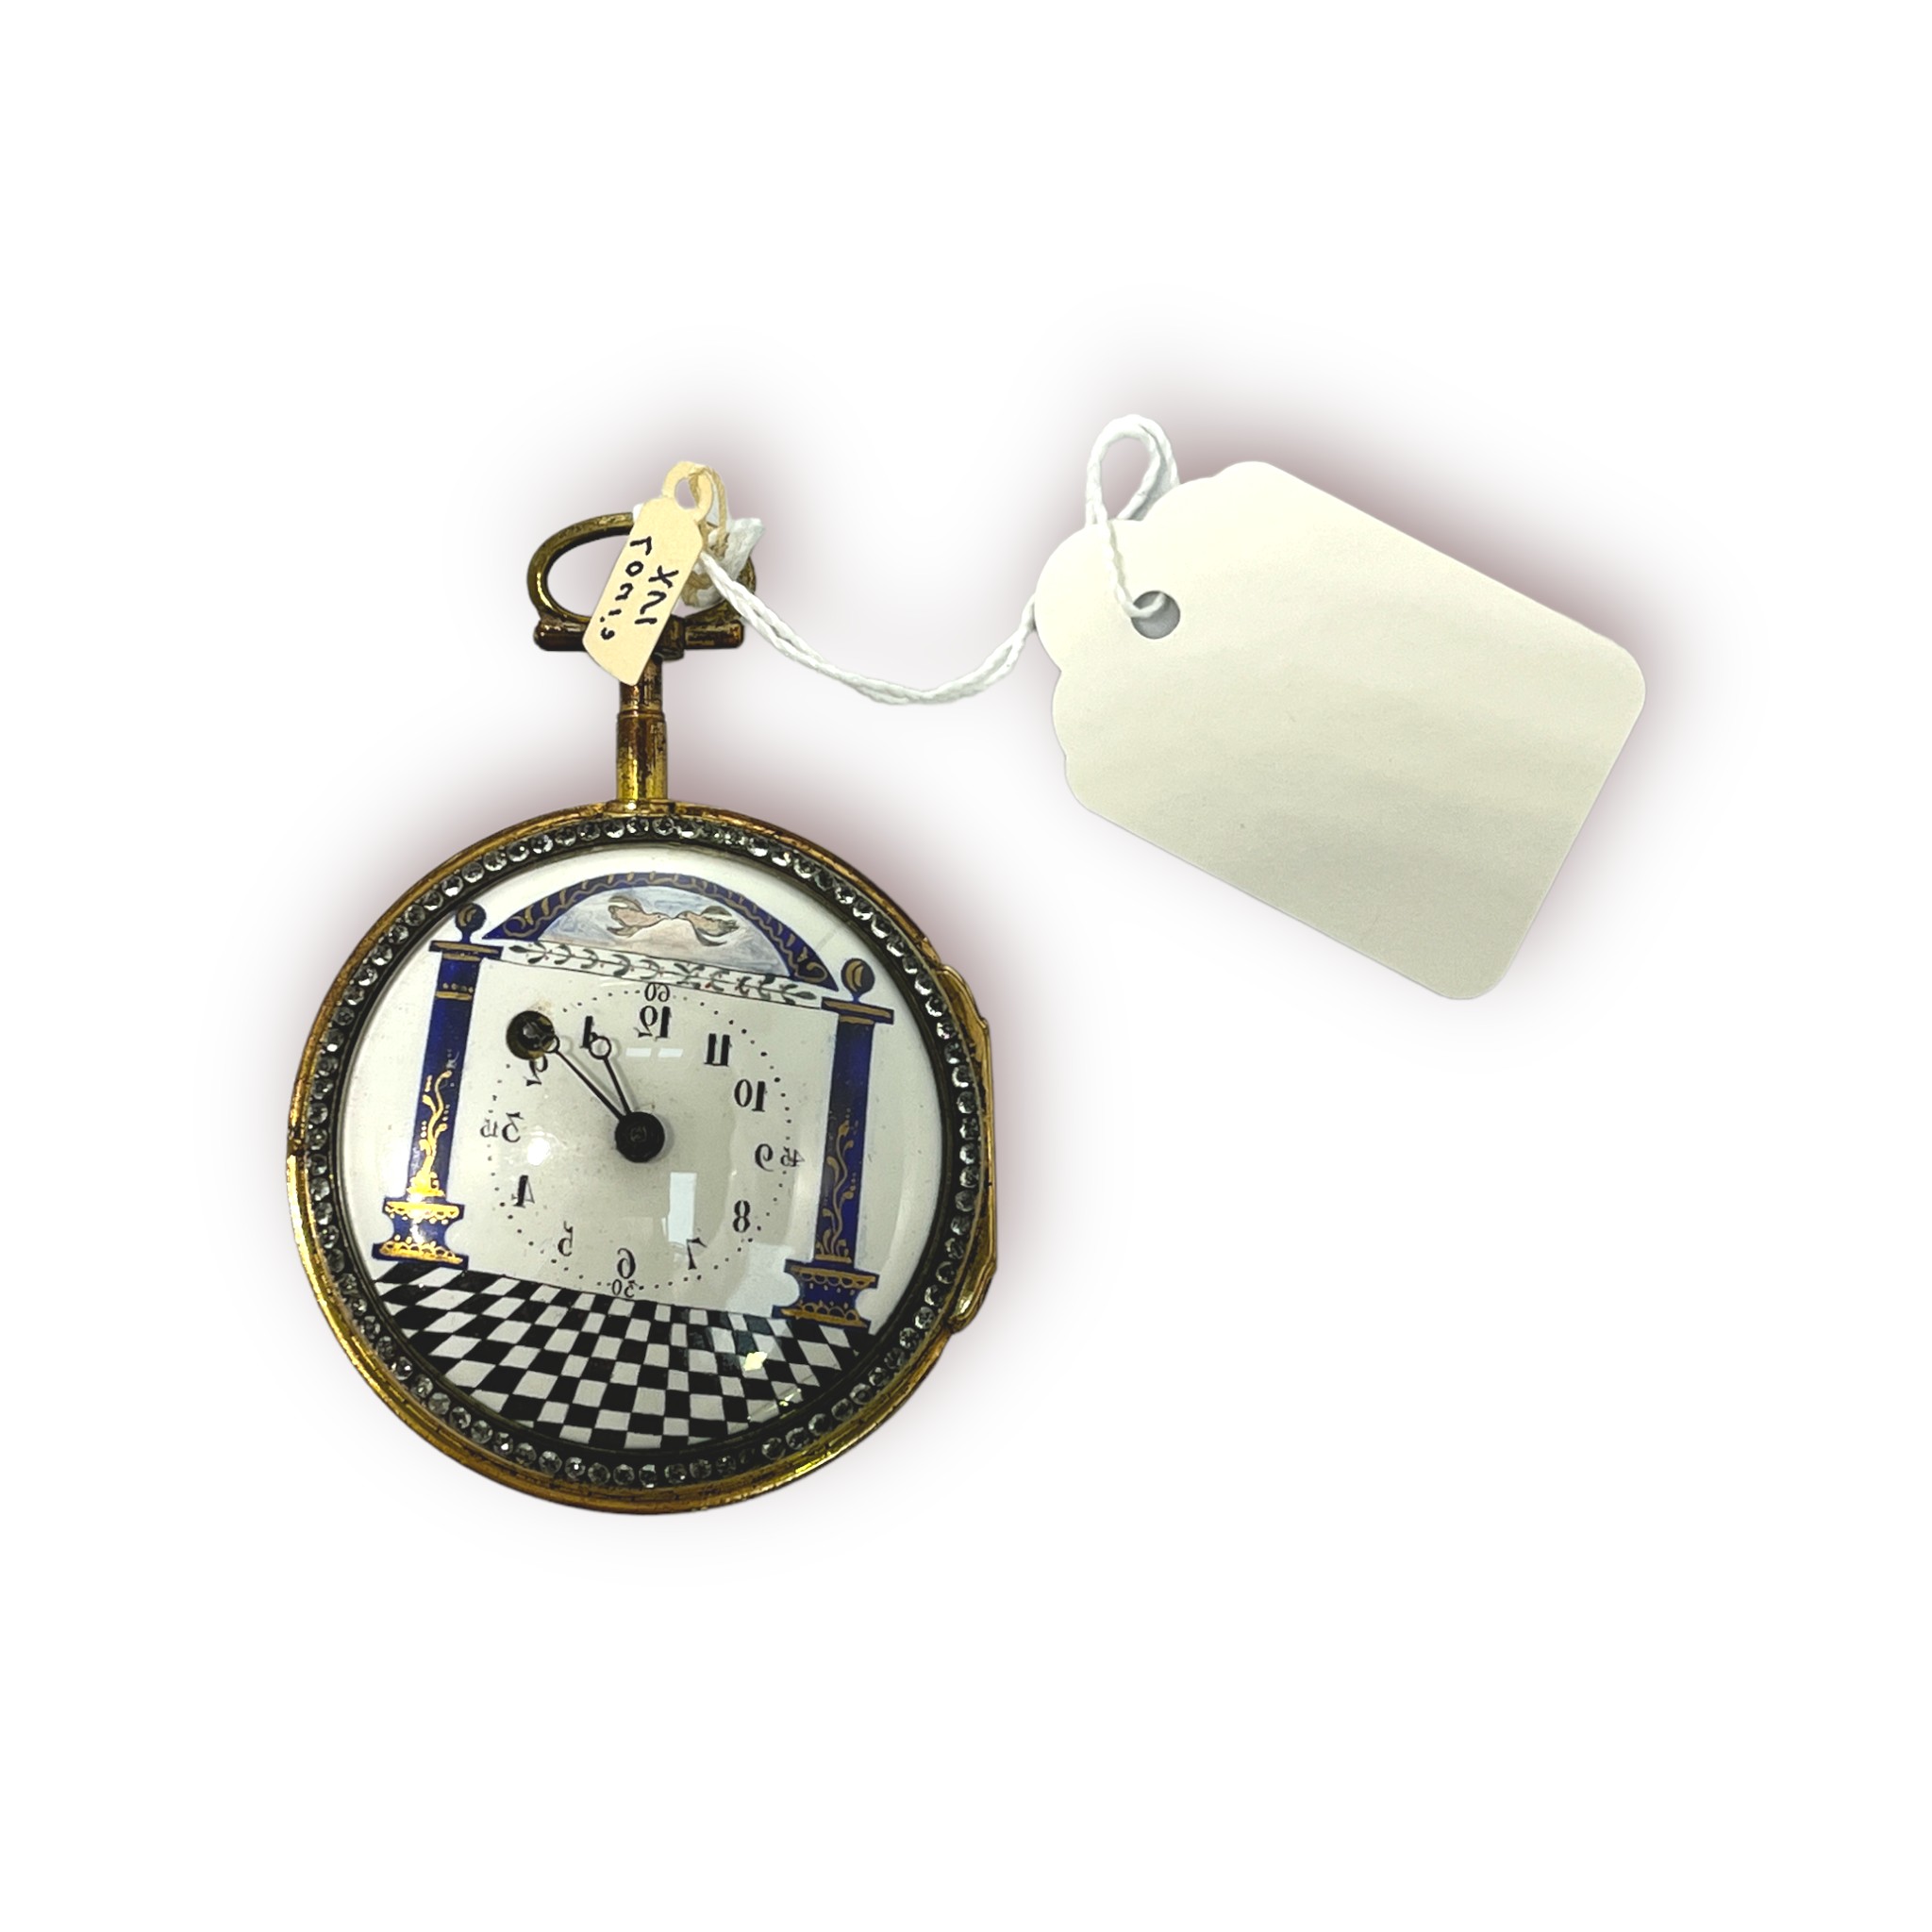 An 18th century continental gilt metal cased verge pocket watch, the white enamel dial with Arabic